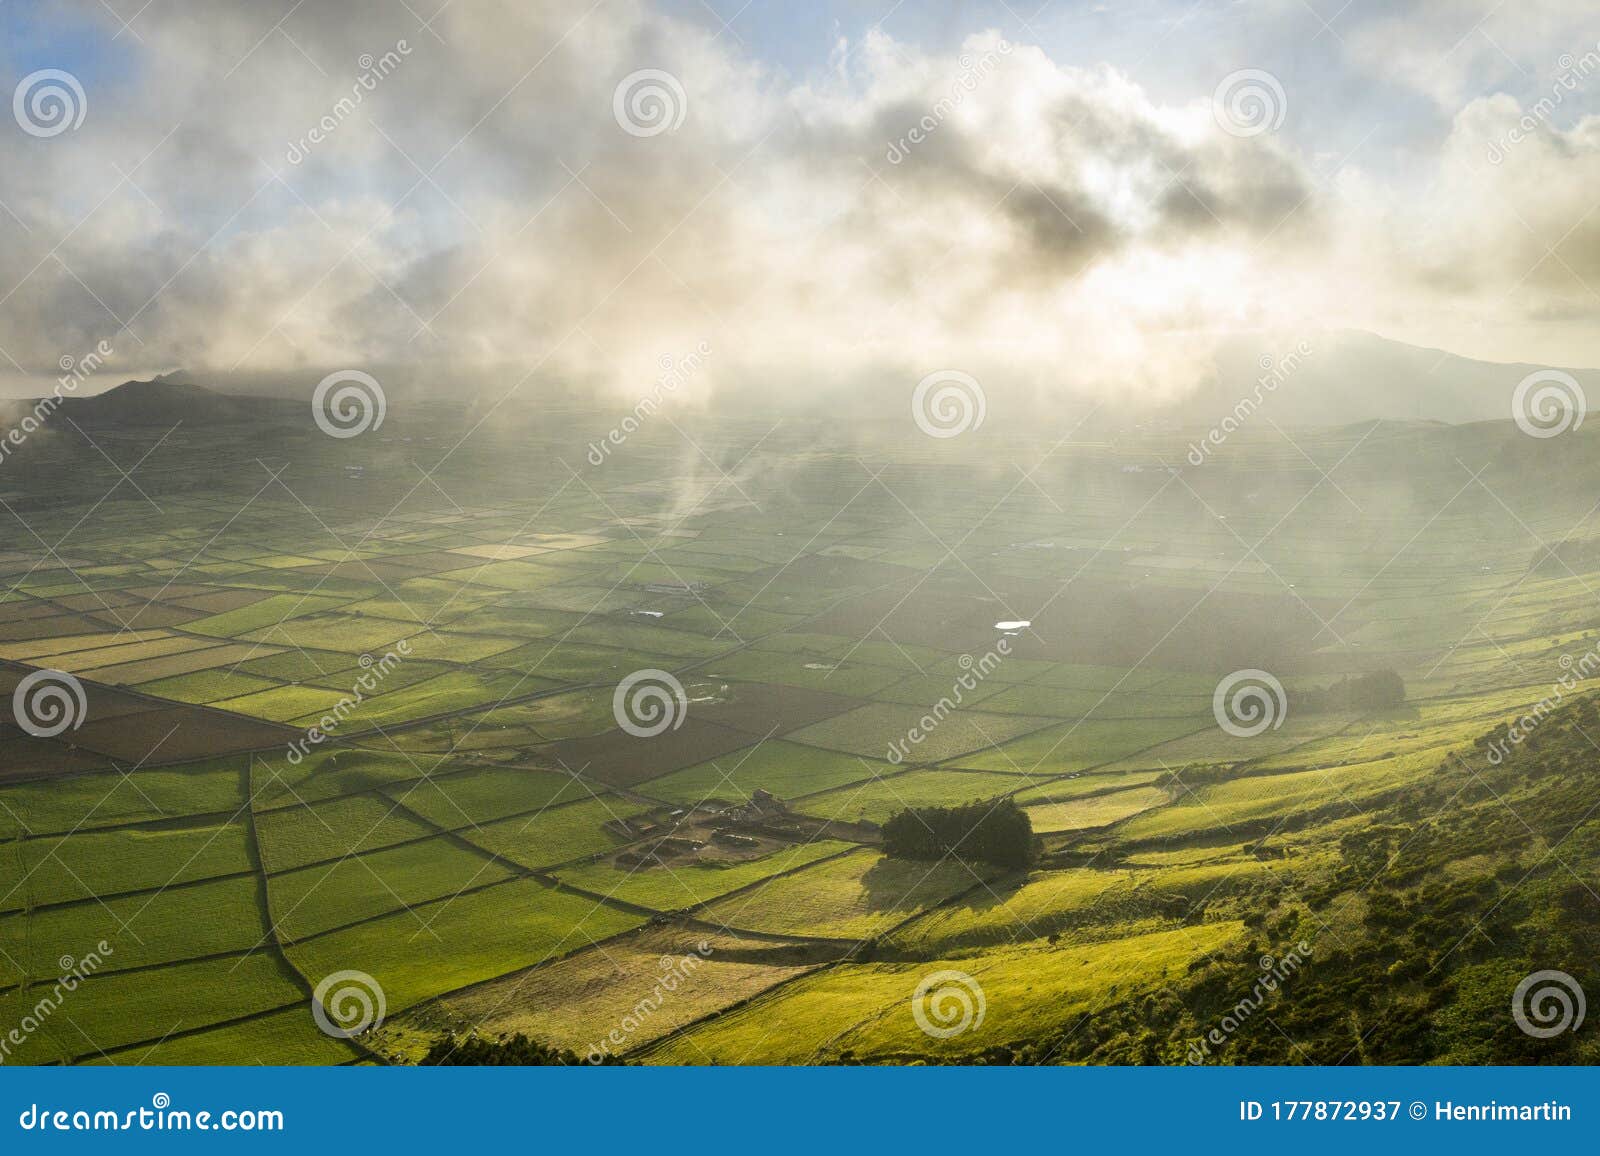 aerial views on the typical abstract countryside of the east of terceira island, one of the islands of the aÃÂ§ores azores